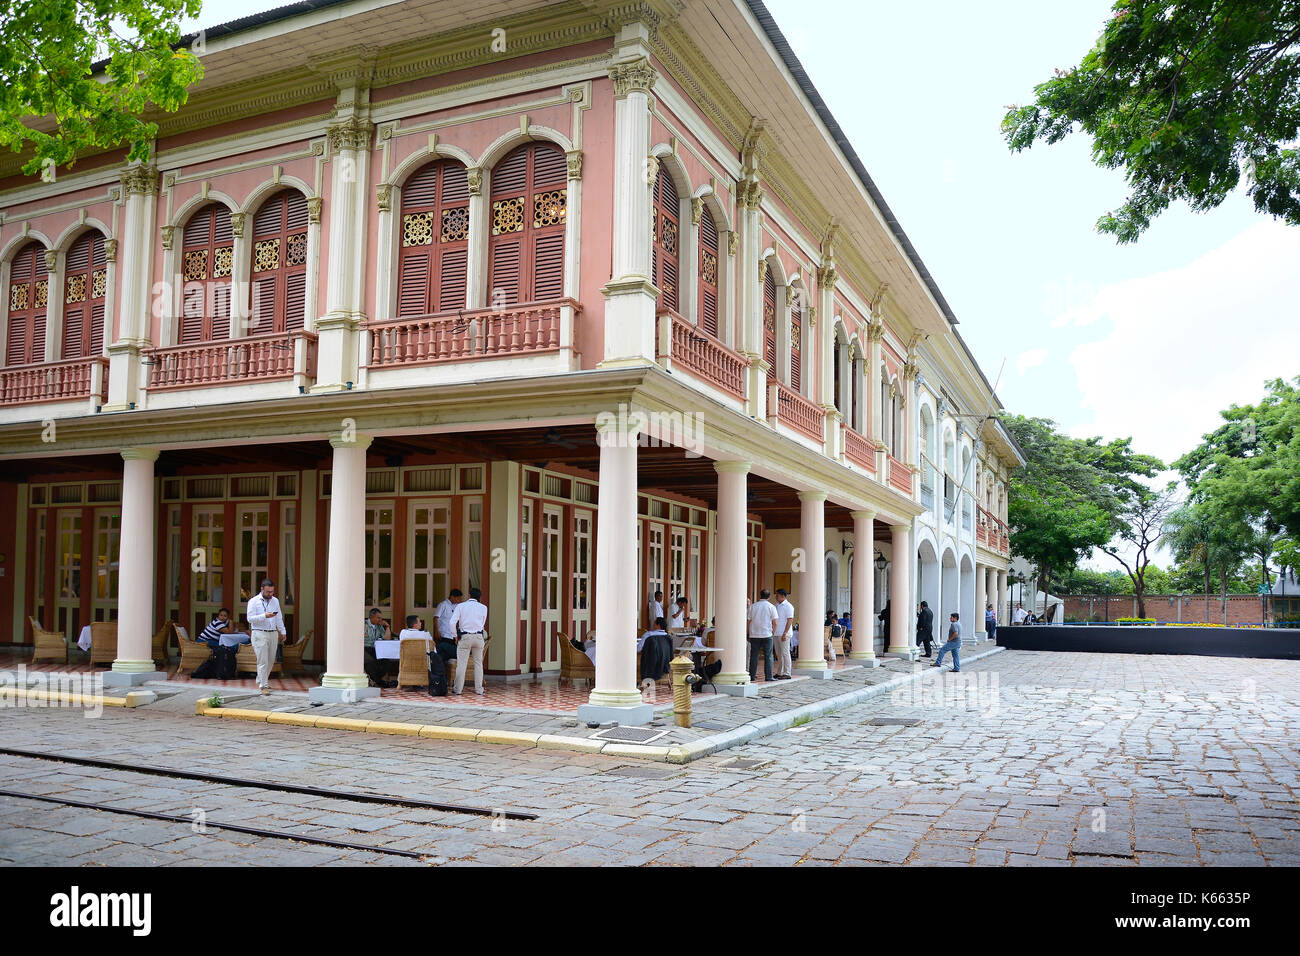 GUAYAQUIL, ECUADOR - FEBRUARY 15, 2017: Guayaquil Historical Park Pier. The Central Bank of Ecuador built the park with educational, cultural, environ Stock Photo